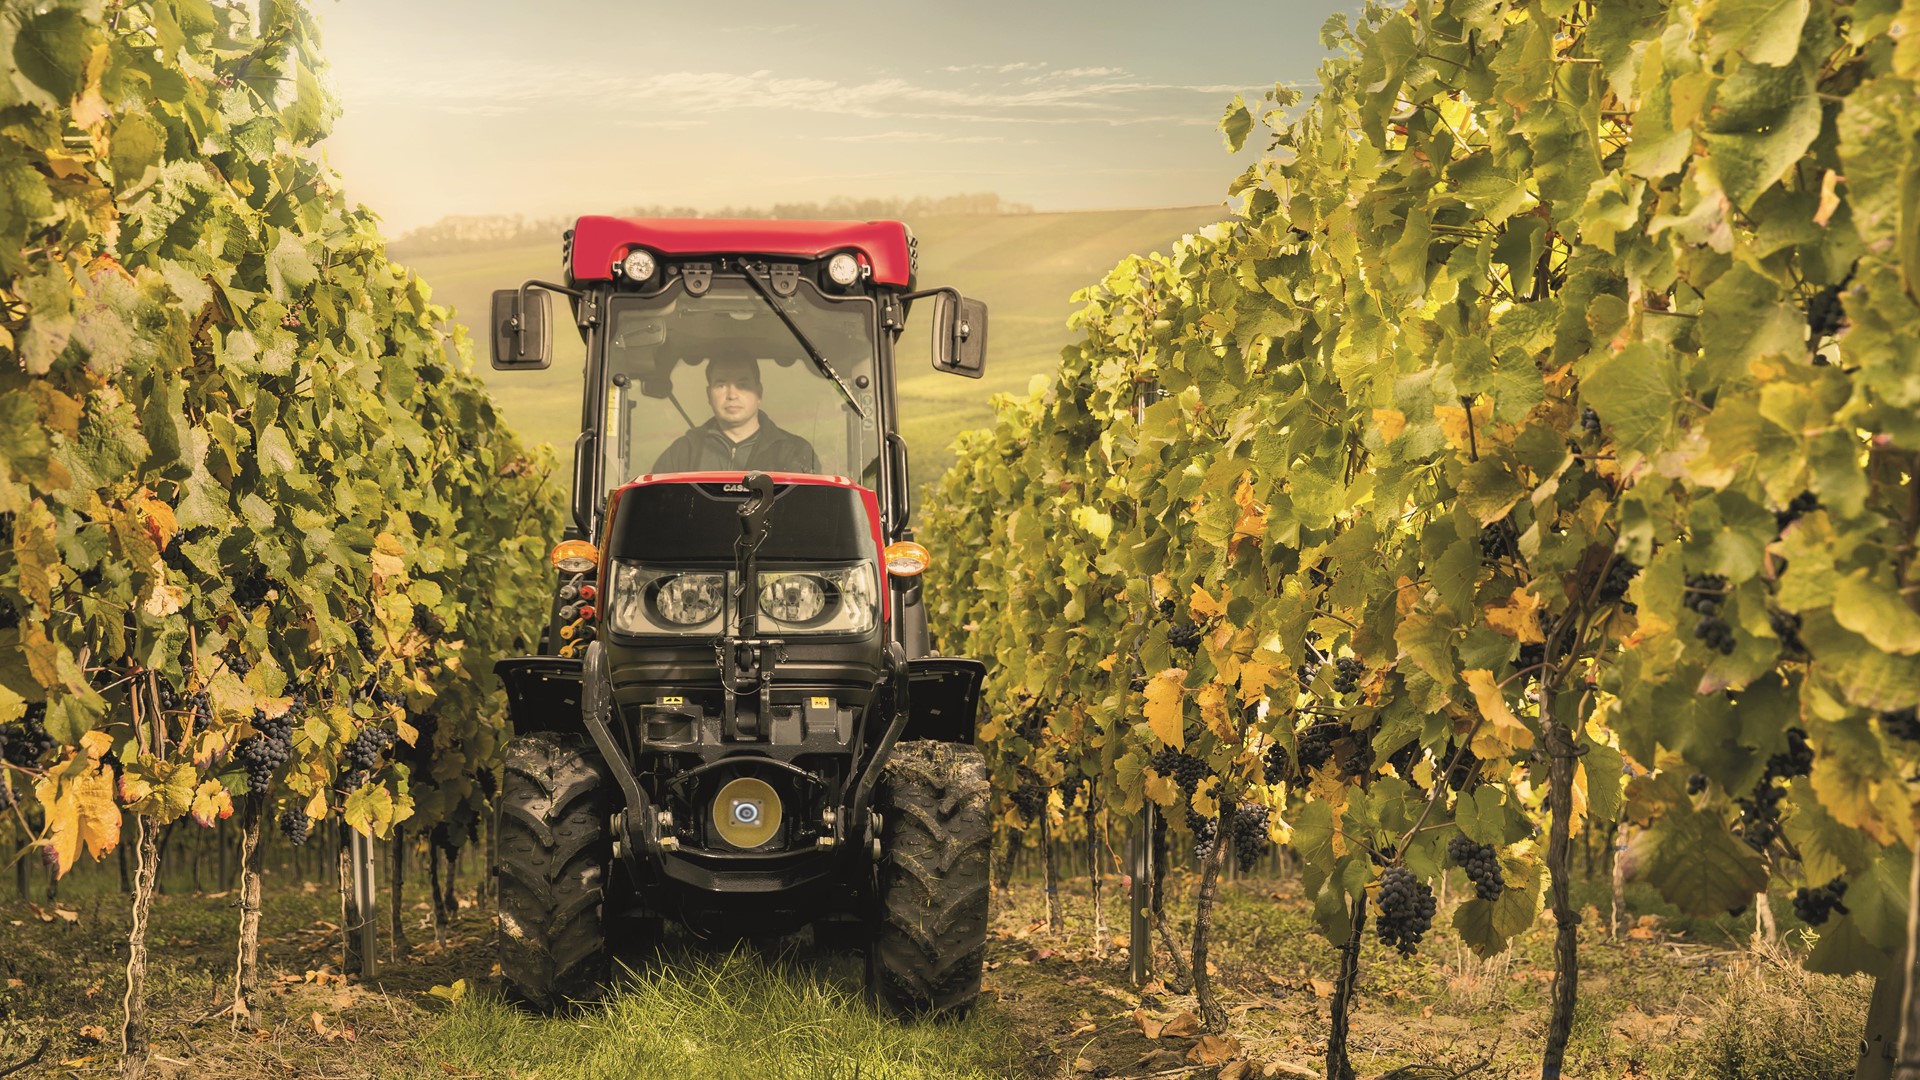 Case IH has unveiled a new generation of its Quantum specialty tractor range